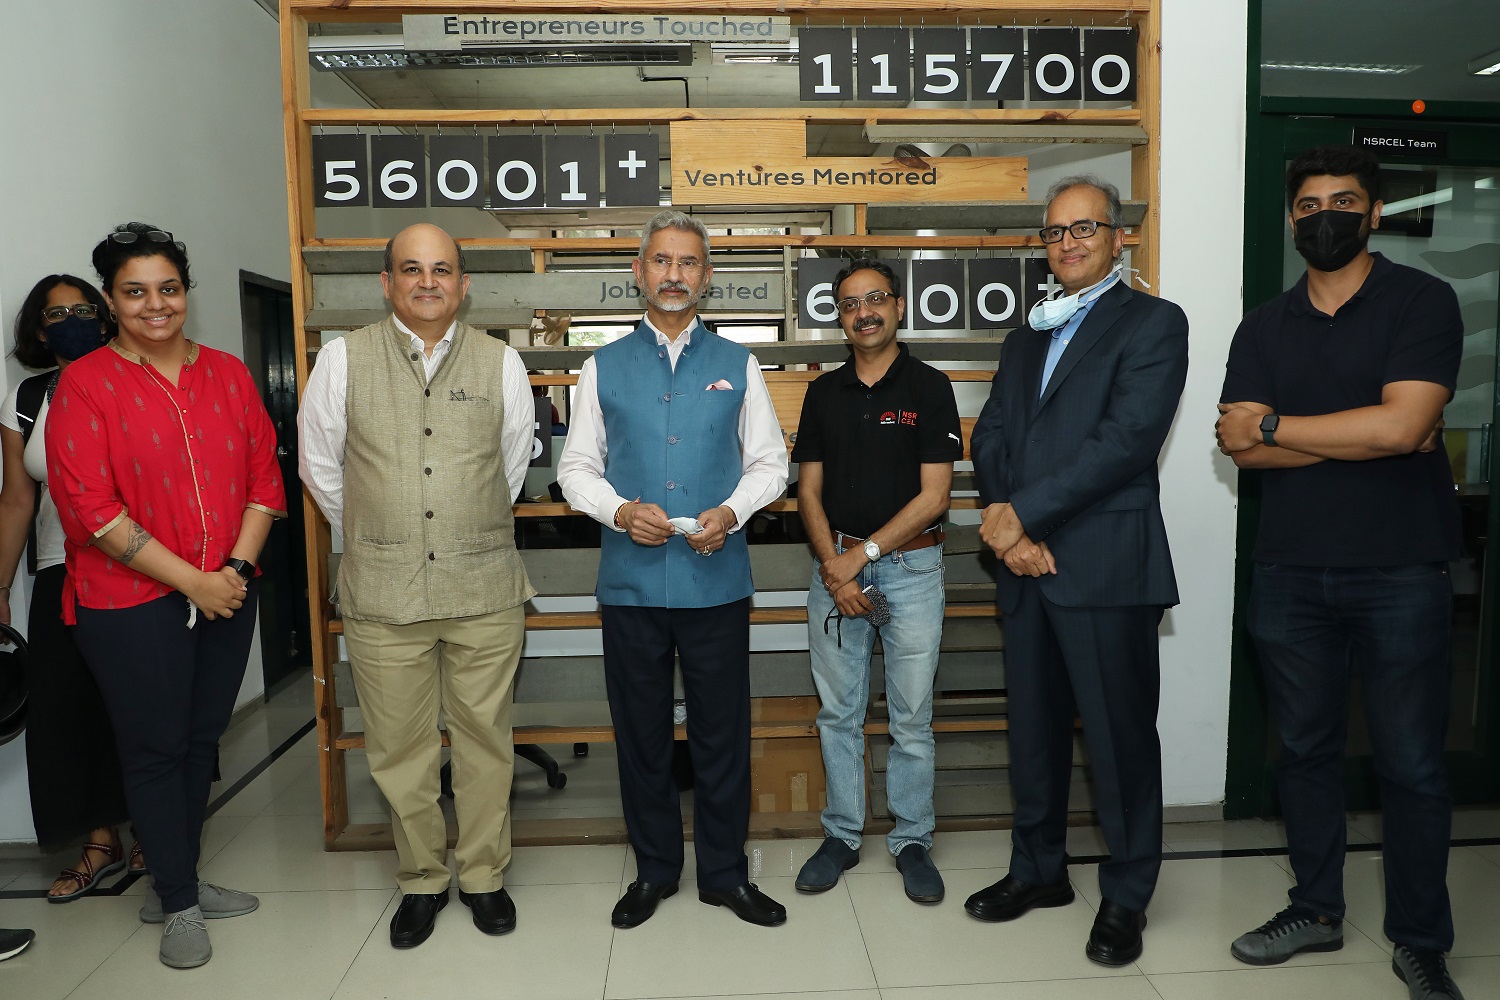 External Affairs Minister Dr. S. Jaishankar, IIMB Director Professor Rishikesha T Krishnan, Dr. Devi Prasad Shetty, Chairperson, Board of Governors, IIMB, at NSRCEL – the centre of excellence for innovation and entrepreneurial learning at IIMB.